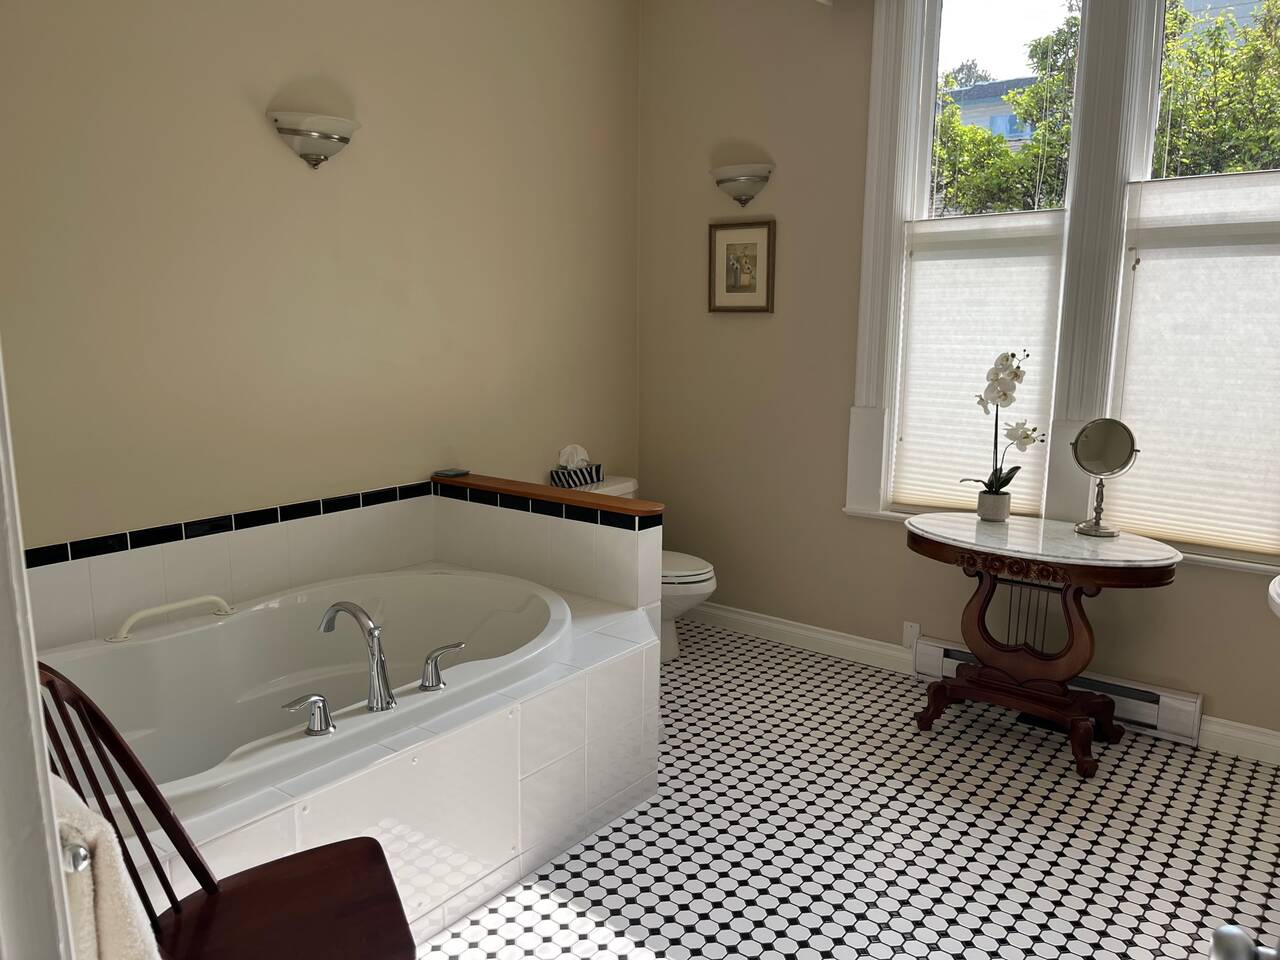 Large bathroom with soaker tub and separate double